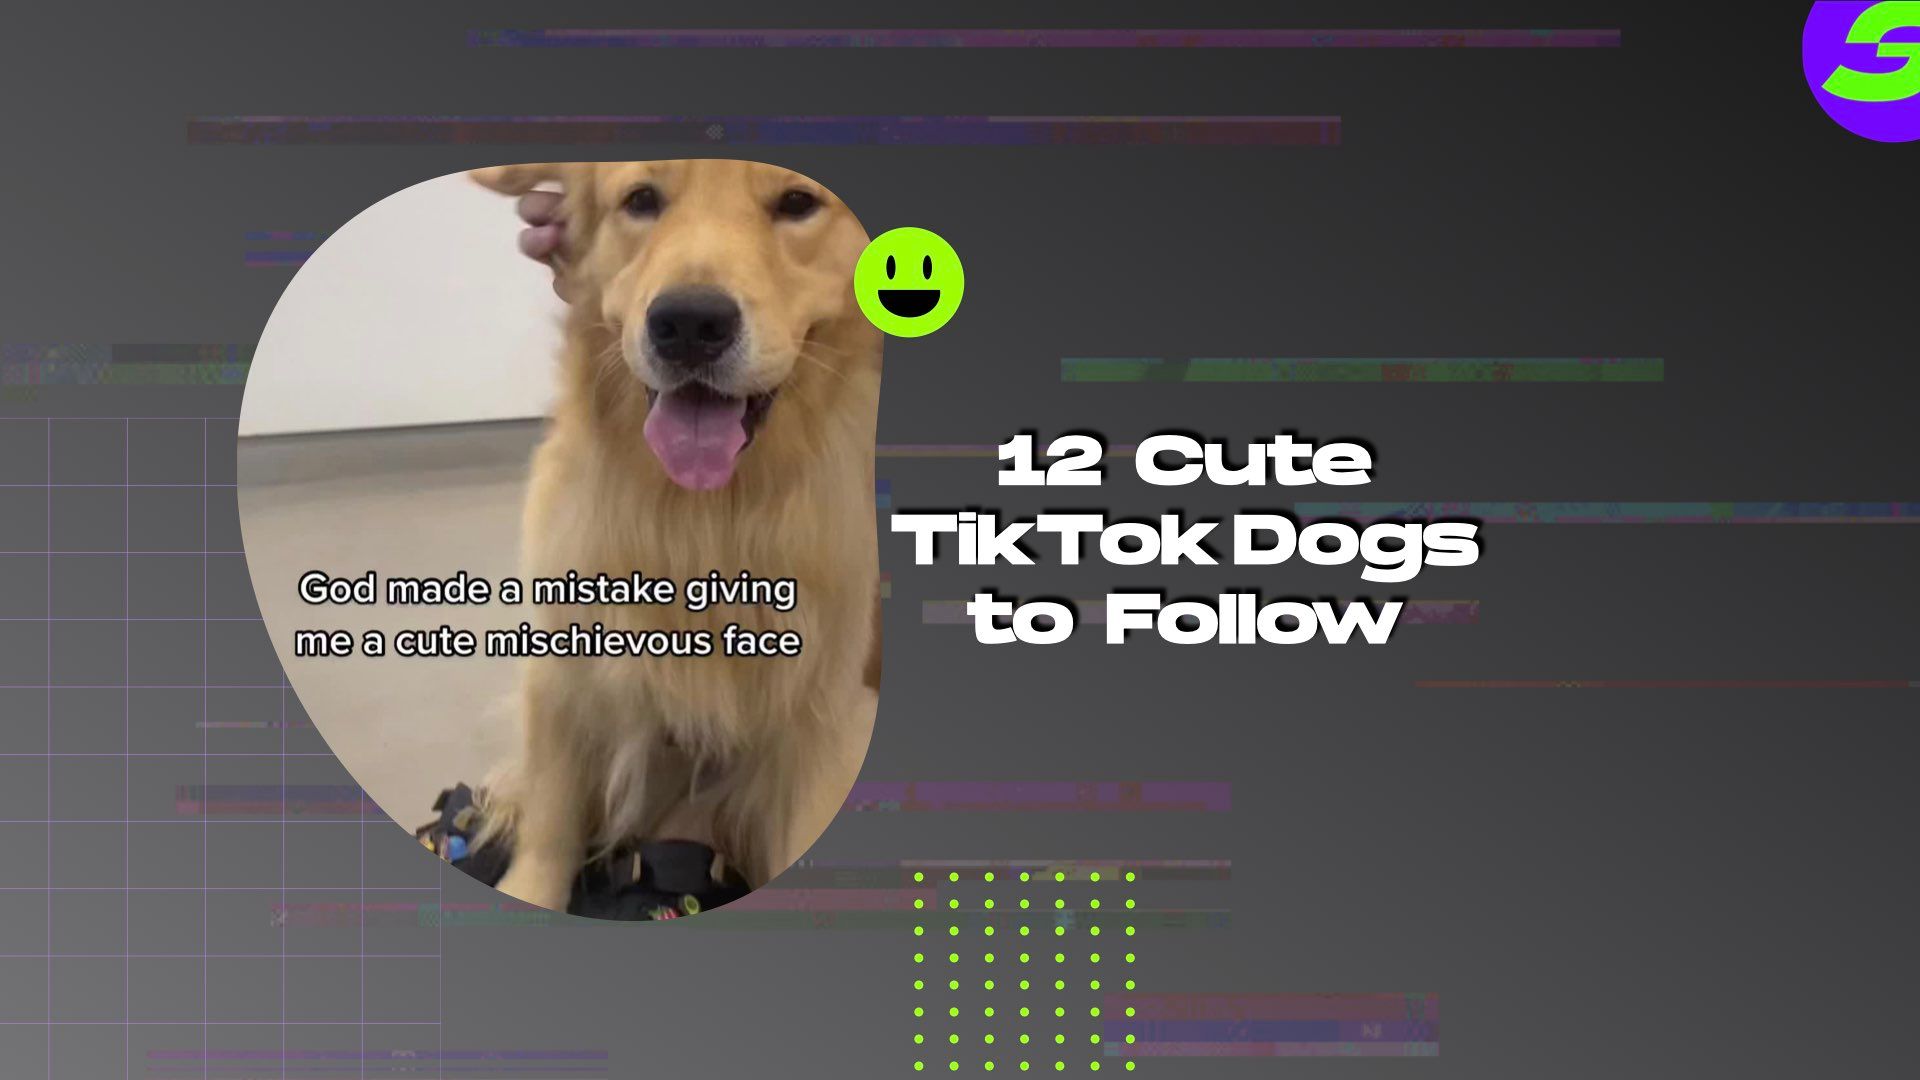 shotcut free video editor android 12 Cute TikTok Dogs to Follow